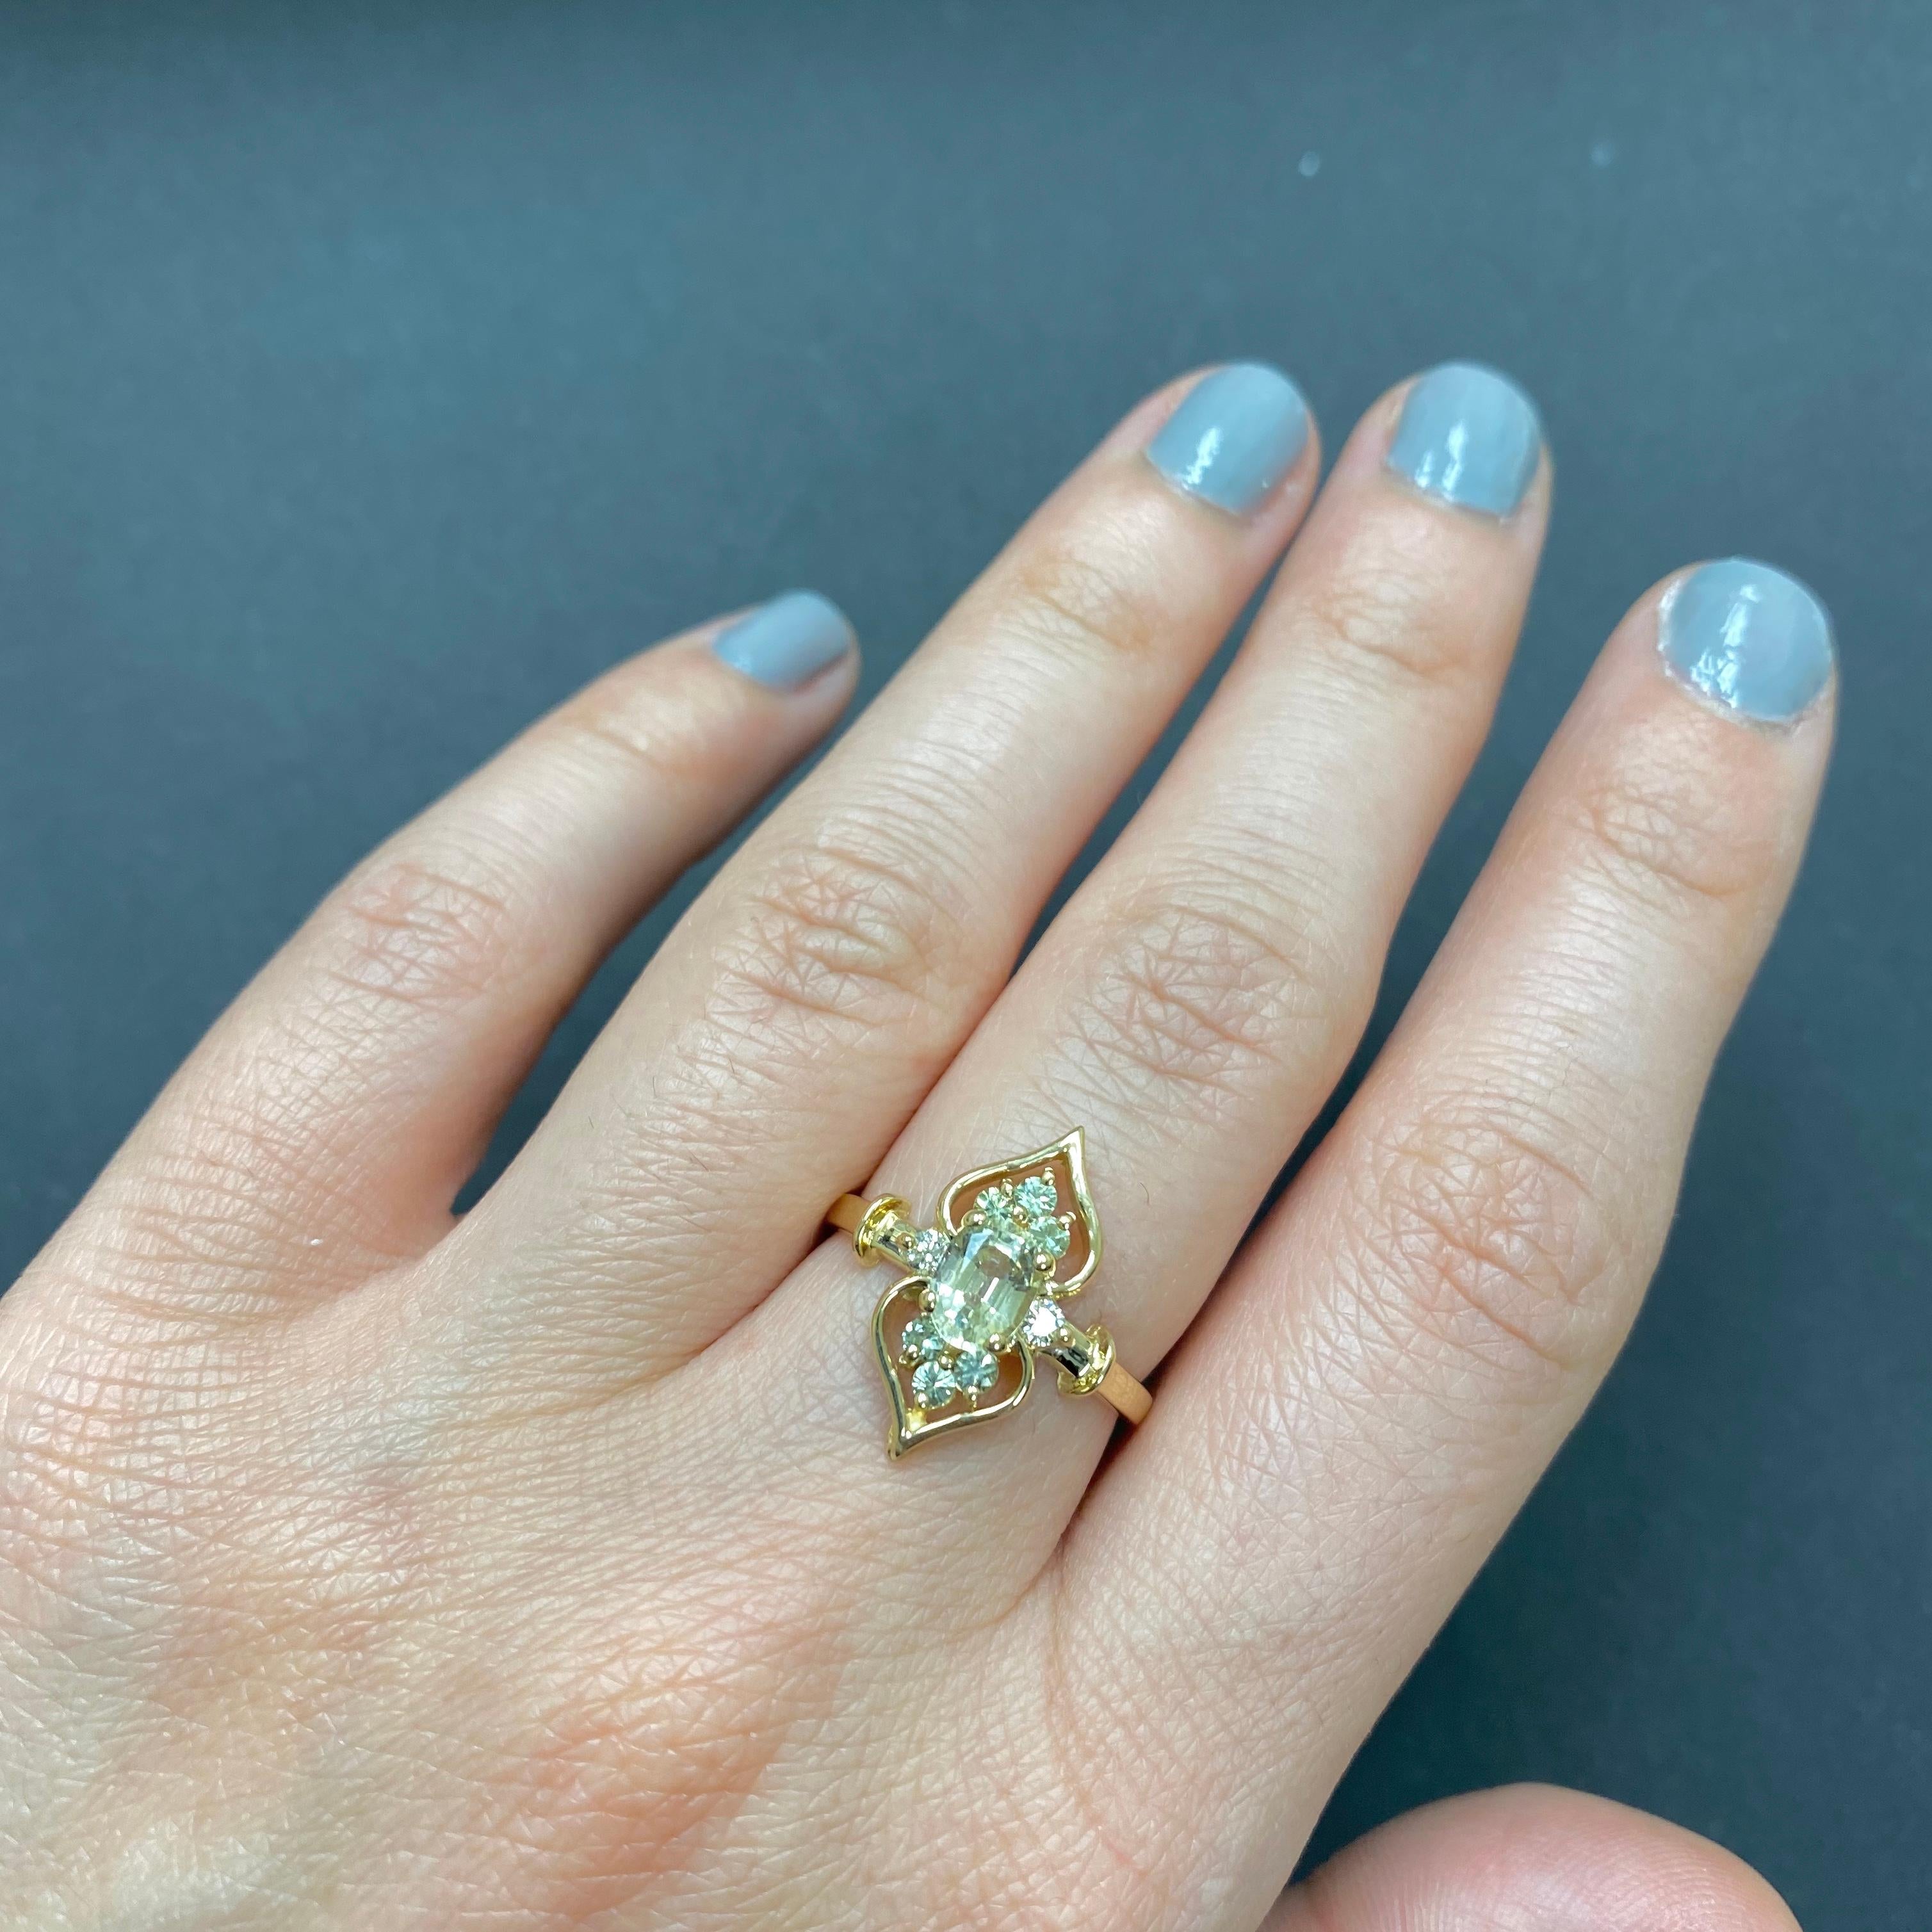 Material: 14k Yellow Gold 
Center Stone Details: 1 Oval Shaped Green Sapphire at 0.77 Carats- Measuring 4 x 6 mm
Mounting Stone Details: 6 Round Green Sapphires at 0.25 Carats
Diamond Details: 2 Brilliant Round White Diamonds at 0.07 Carats -